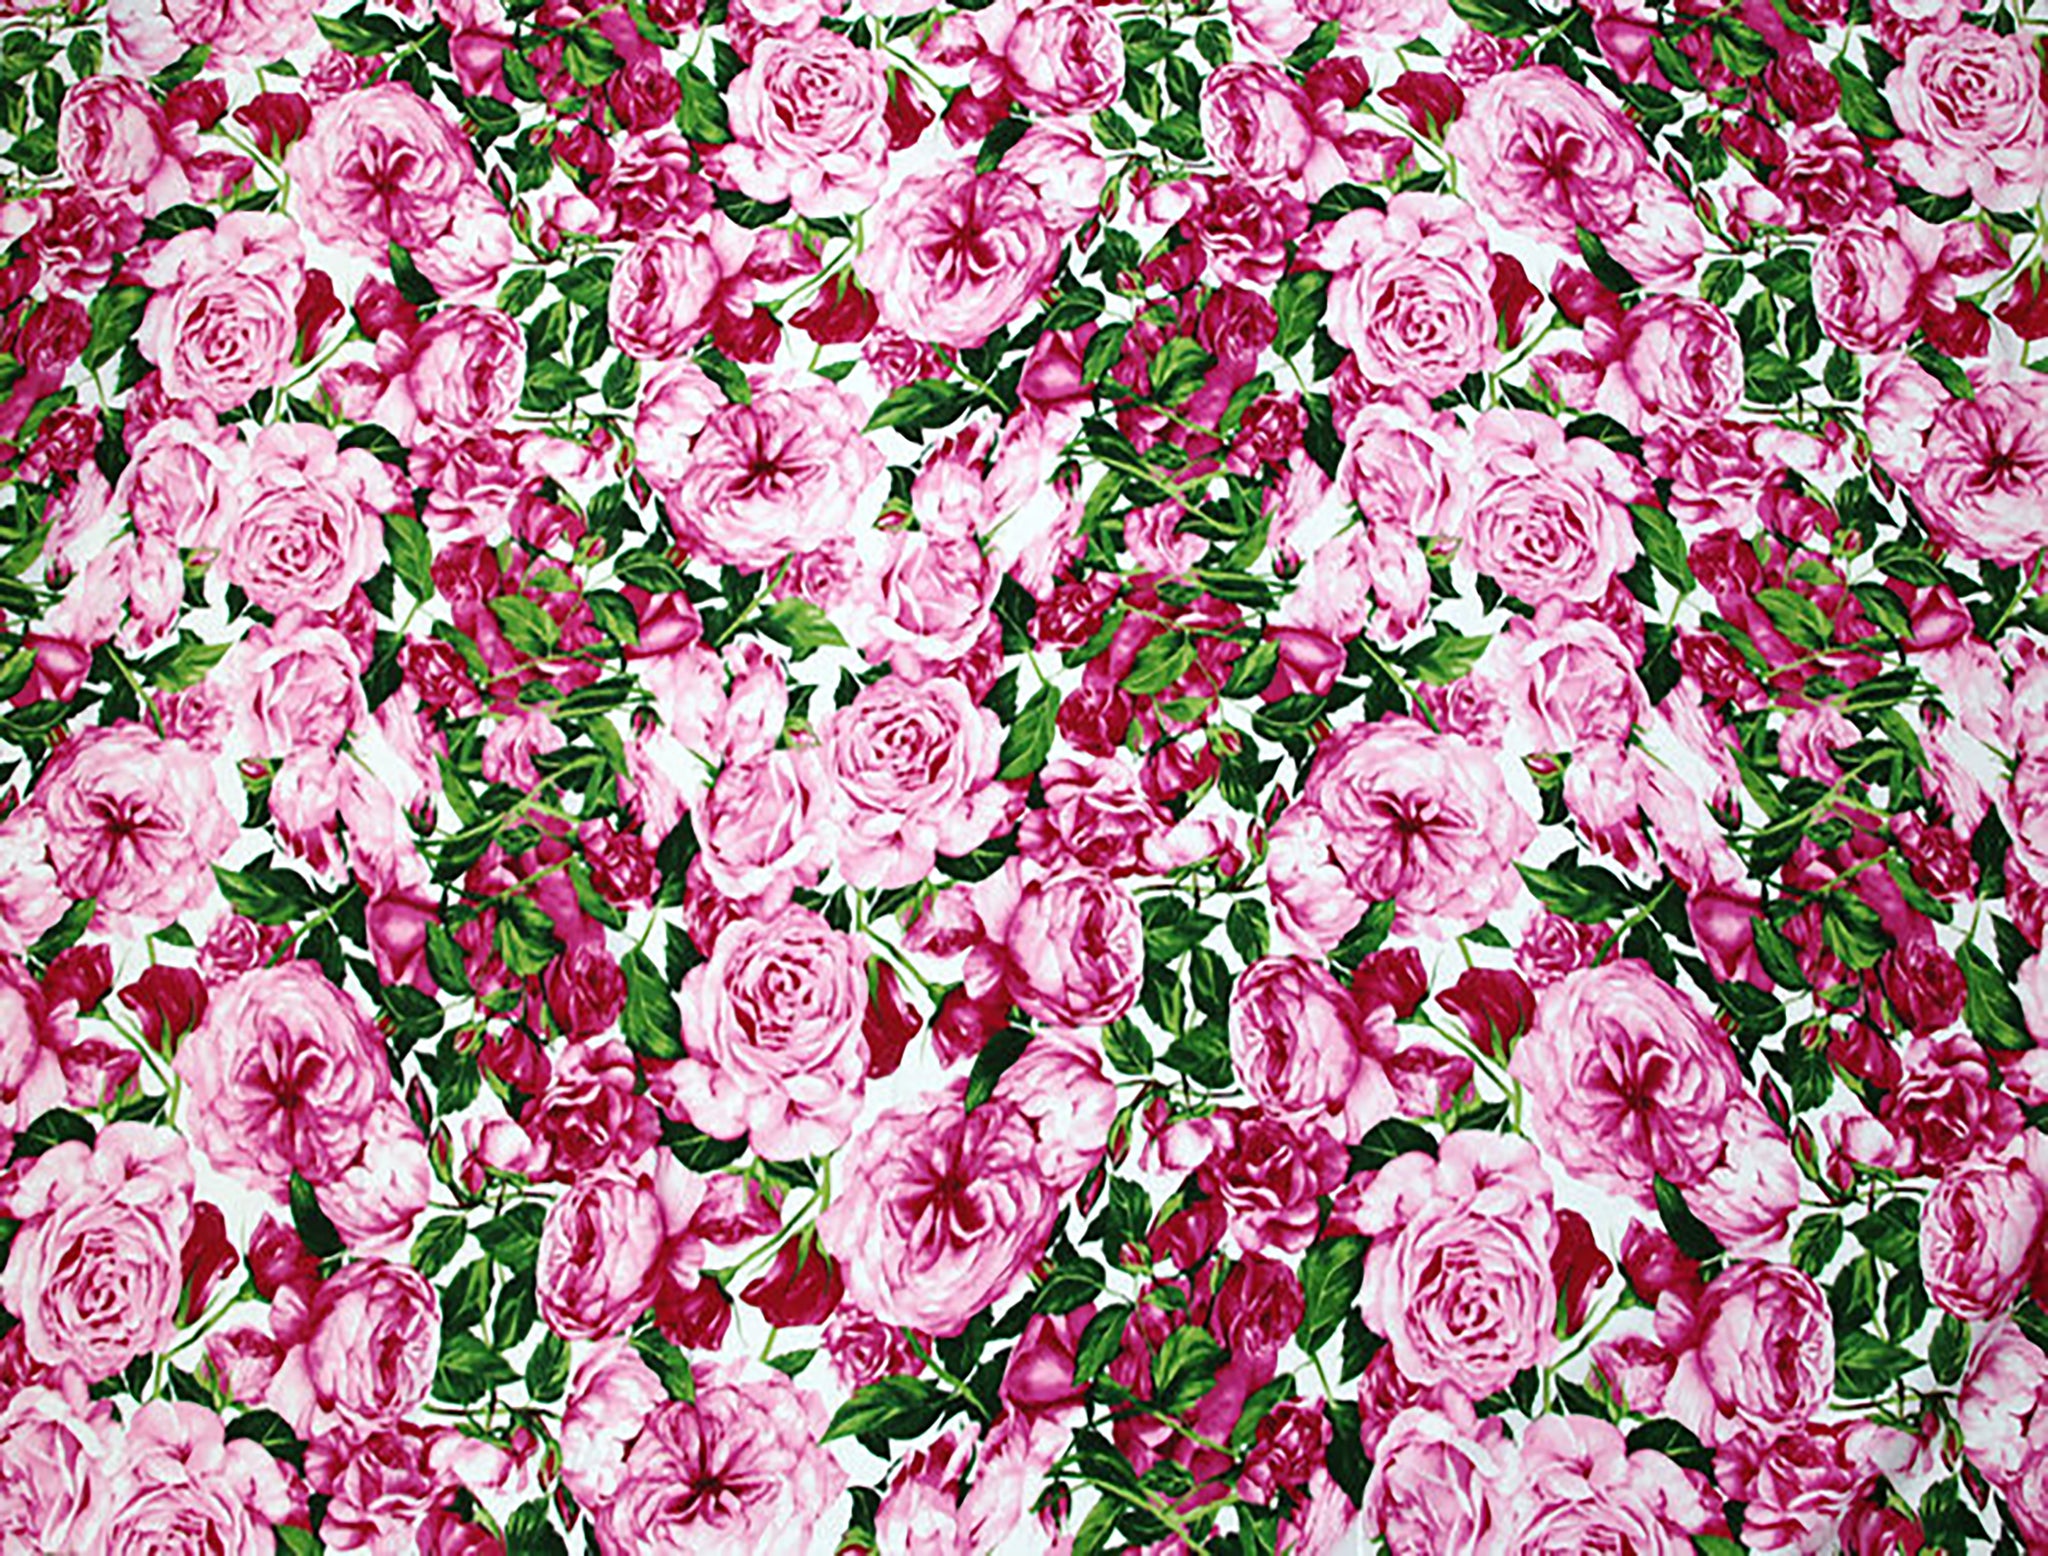 Shades of Pink/Raspberry/Green Floral Floral Print on White Background - Italian Cotton Poplin -147 cm Wide.